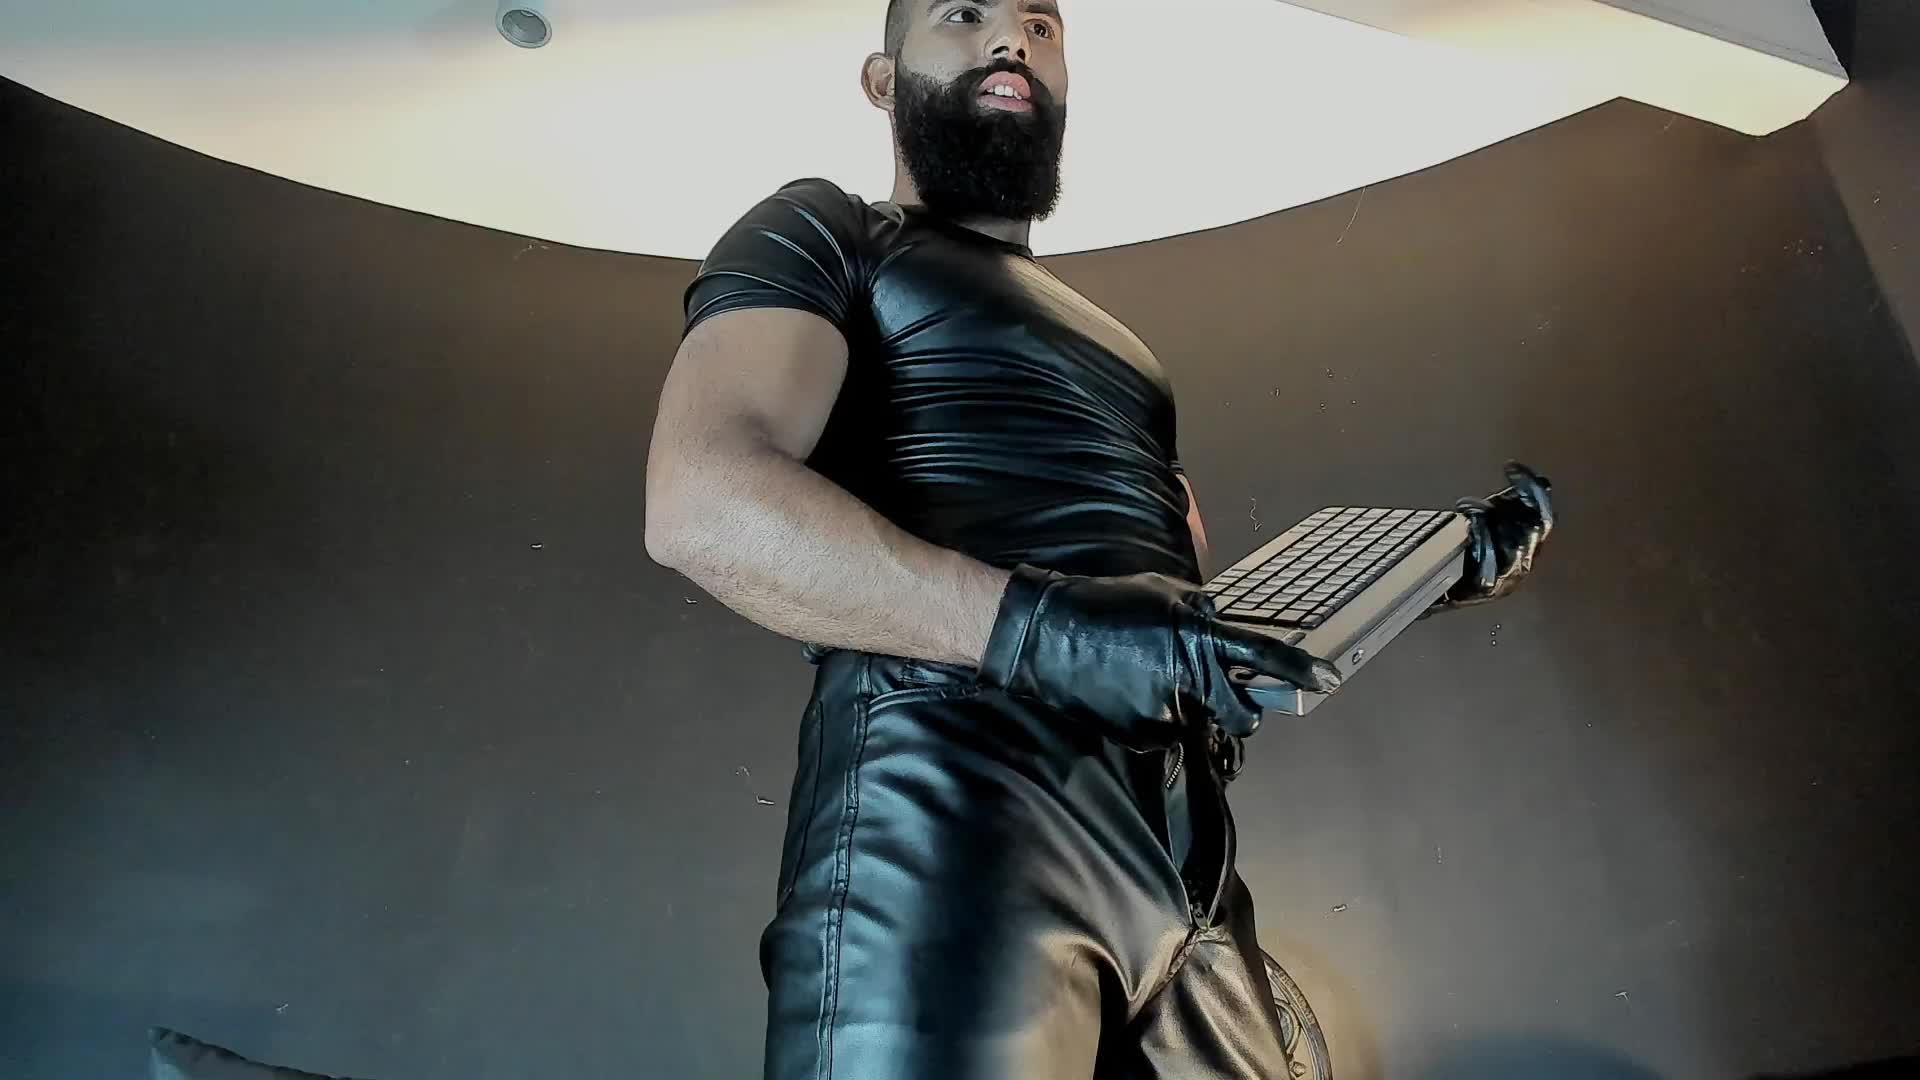 Wanking with leather